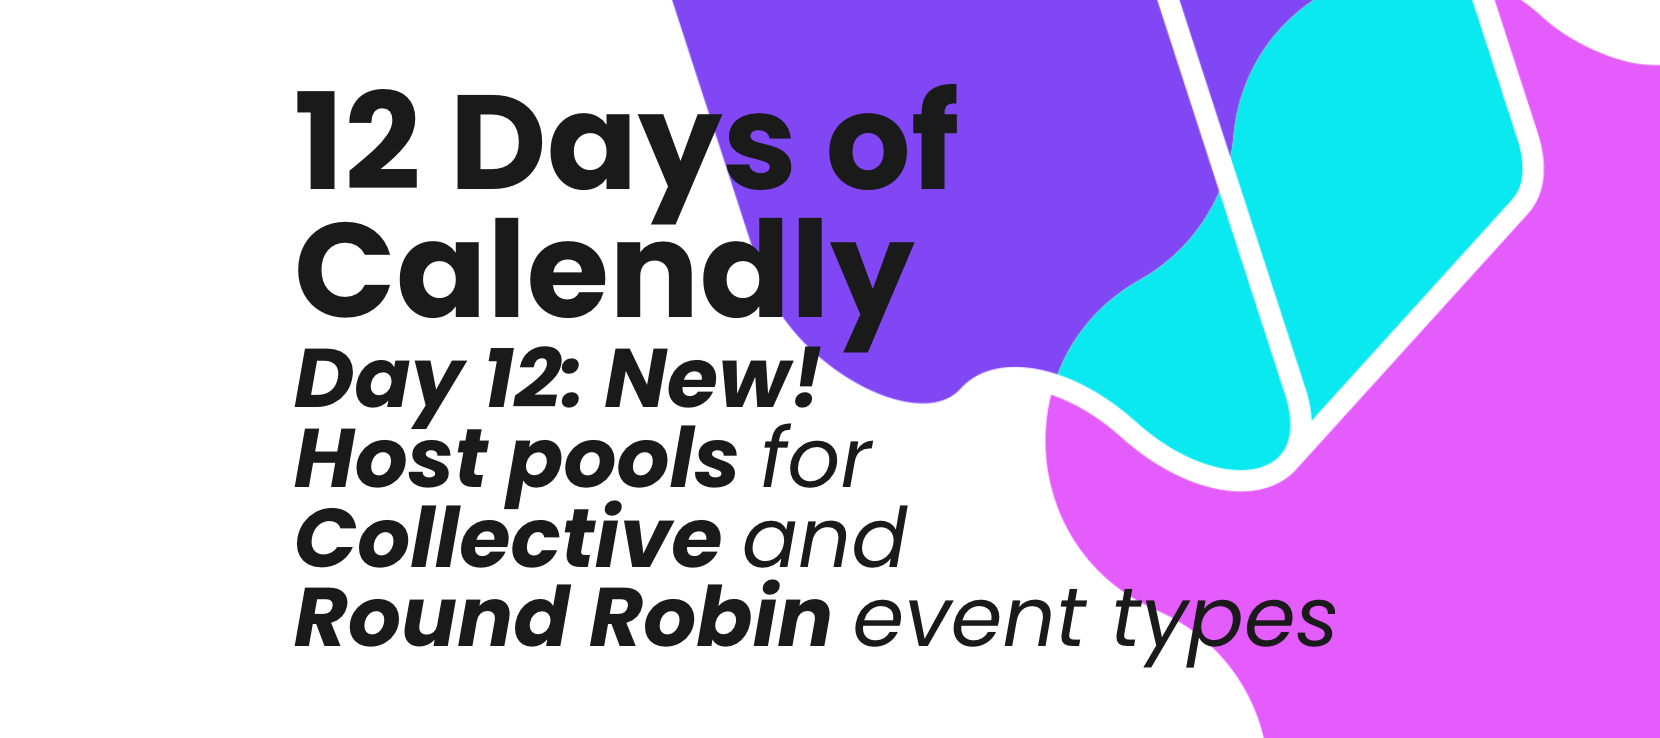 12 Days of Calendly, Day 12: NEW! Host Pools for Collective and Round Robin Events